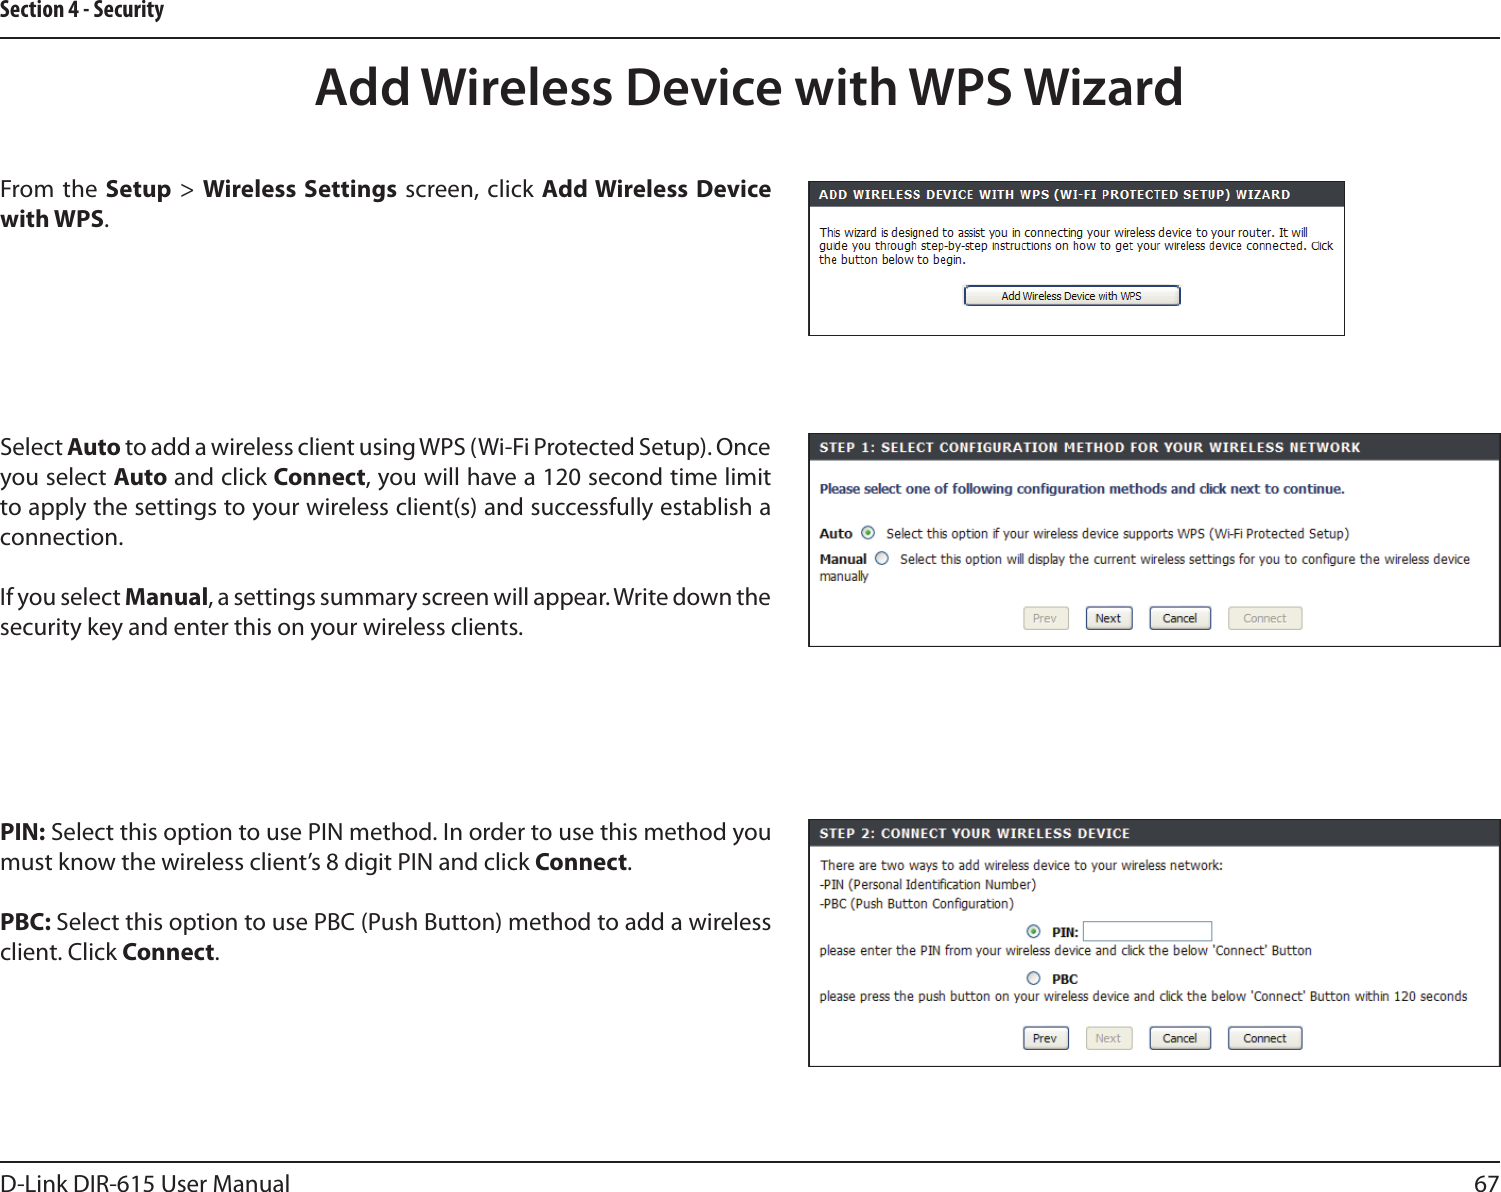 67D-Link DIR-615 User ManualSection 4 - SecurityFrom the Setup  &gt; Wireless  Settings screen, click Add Wireless Device with WPS.Add Wireless Device with WPS WizardPIN: Select this option to use PIN method. In order to use this method you must know the wireless client’s 8 digit PIN and click Connect.PBC: Select this option to use PBC (Push Button) method to add a wireless client. Click Connect.Select Auto to add a wireless client using WPS (Wi-Fi Protected Setup). Once you select Auto and click Connect, you will have a 120 second time limit to apply the settings to your wireless client(s) and successfully establish a connection. If you select Manual, a settings summary screen will appear. Write down the security key and enter this on your wireless clients. 